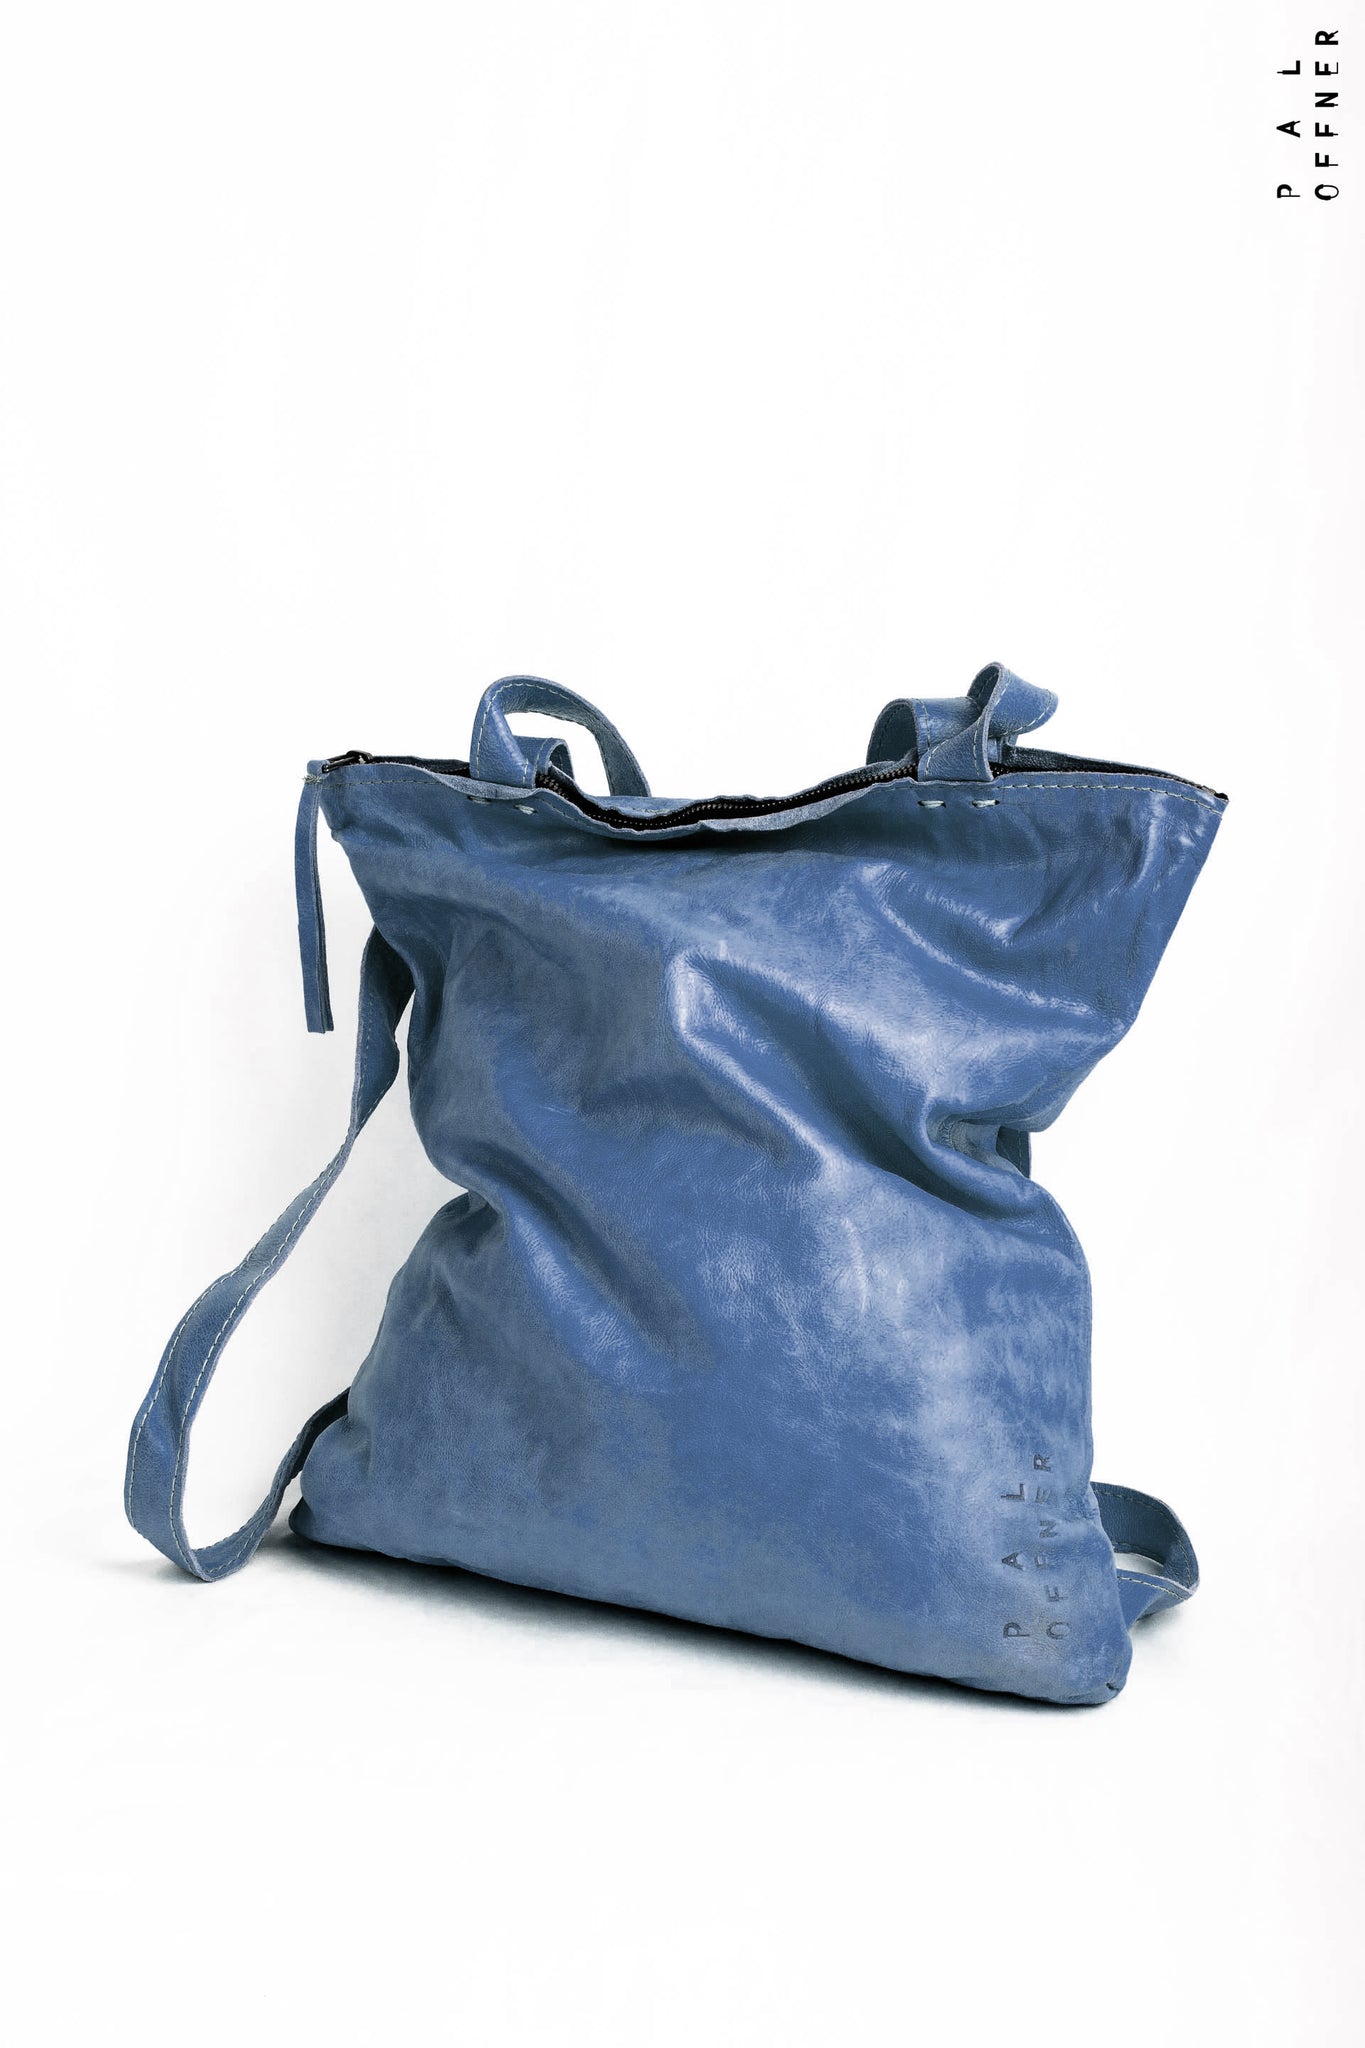 Tote Backpack_Leather